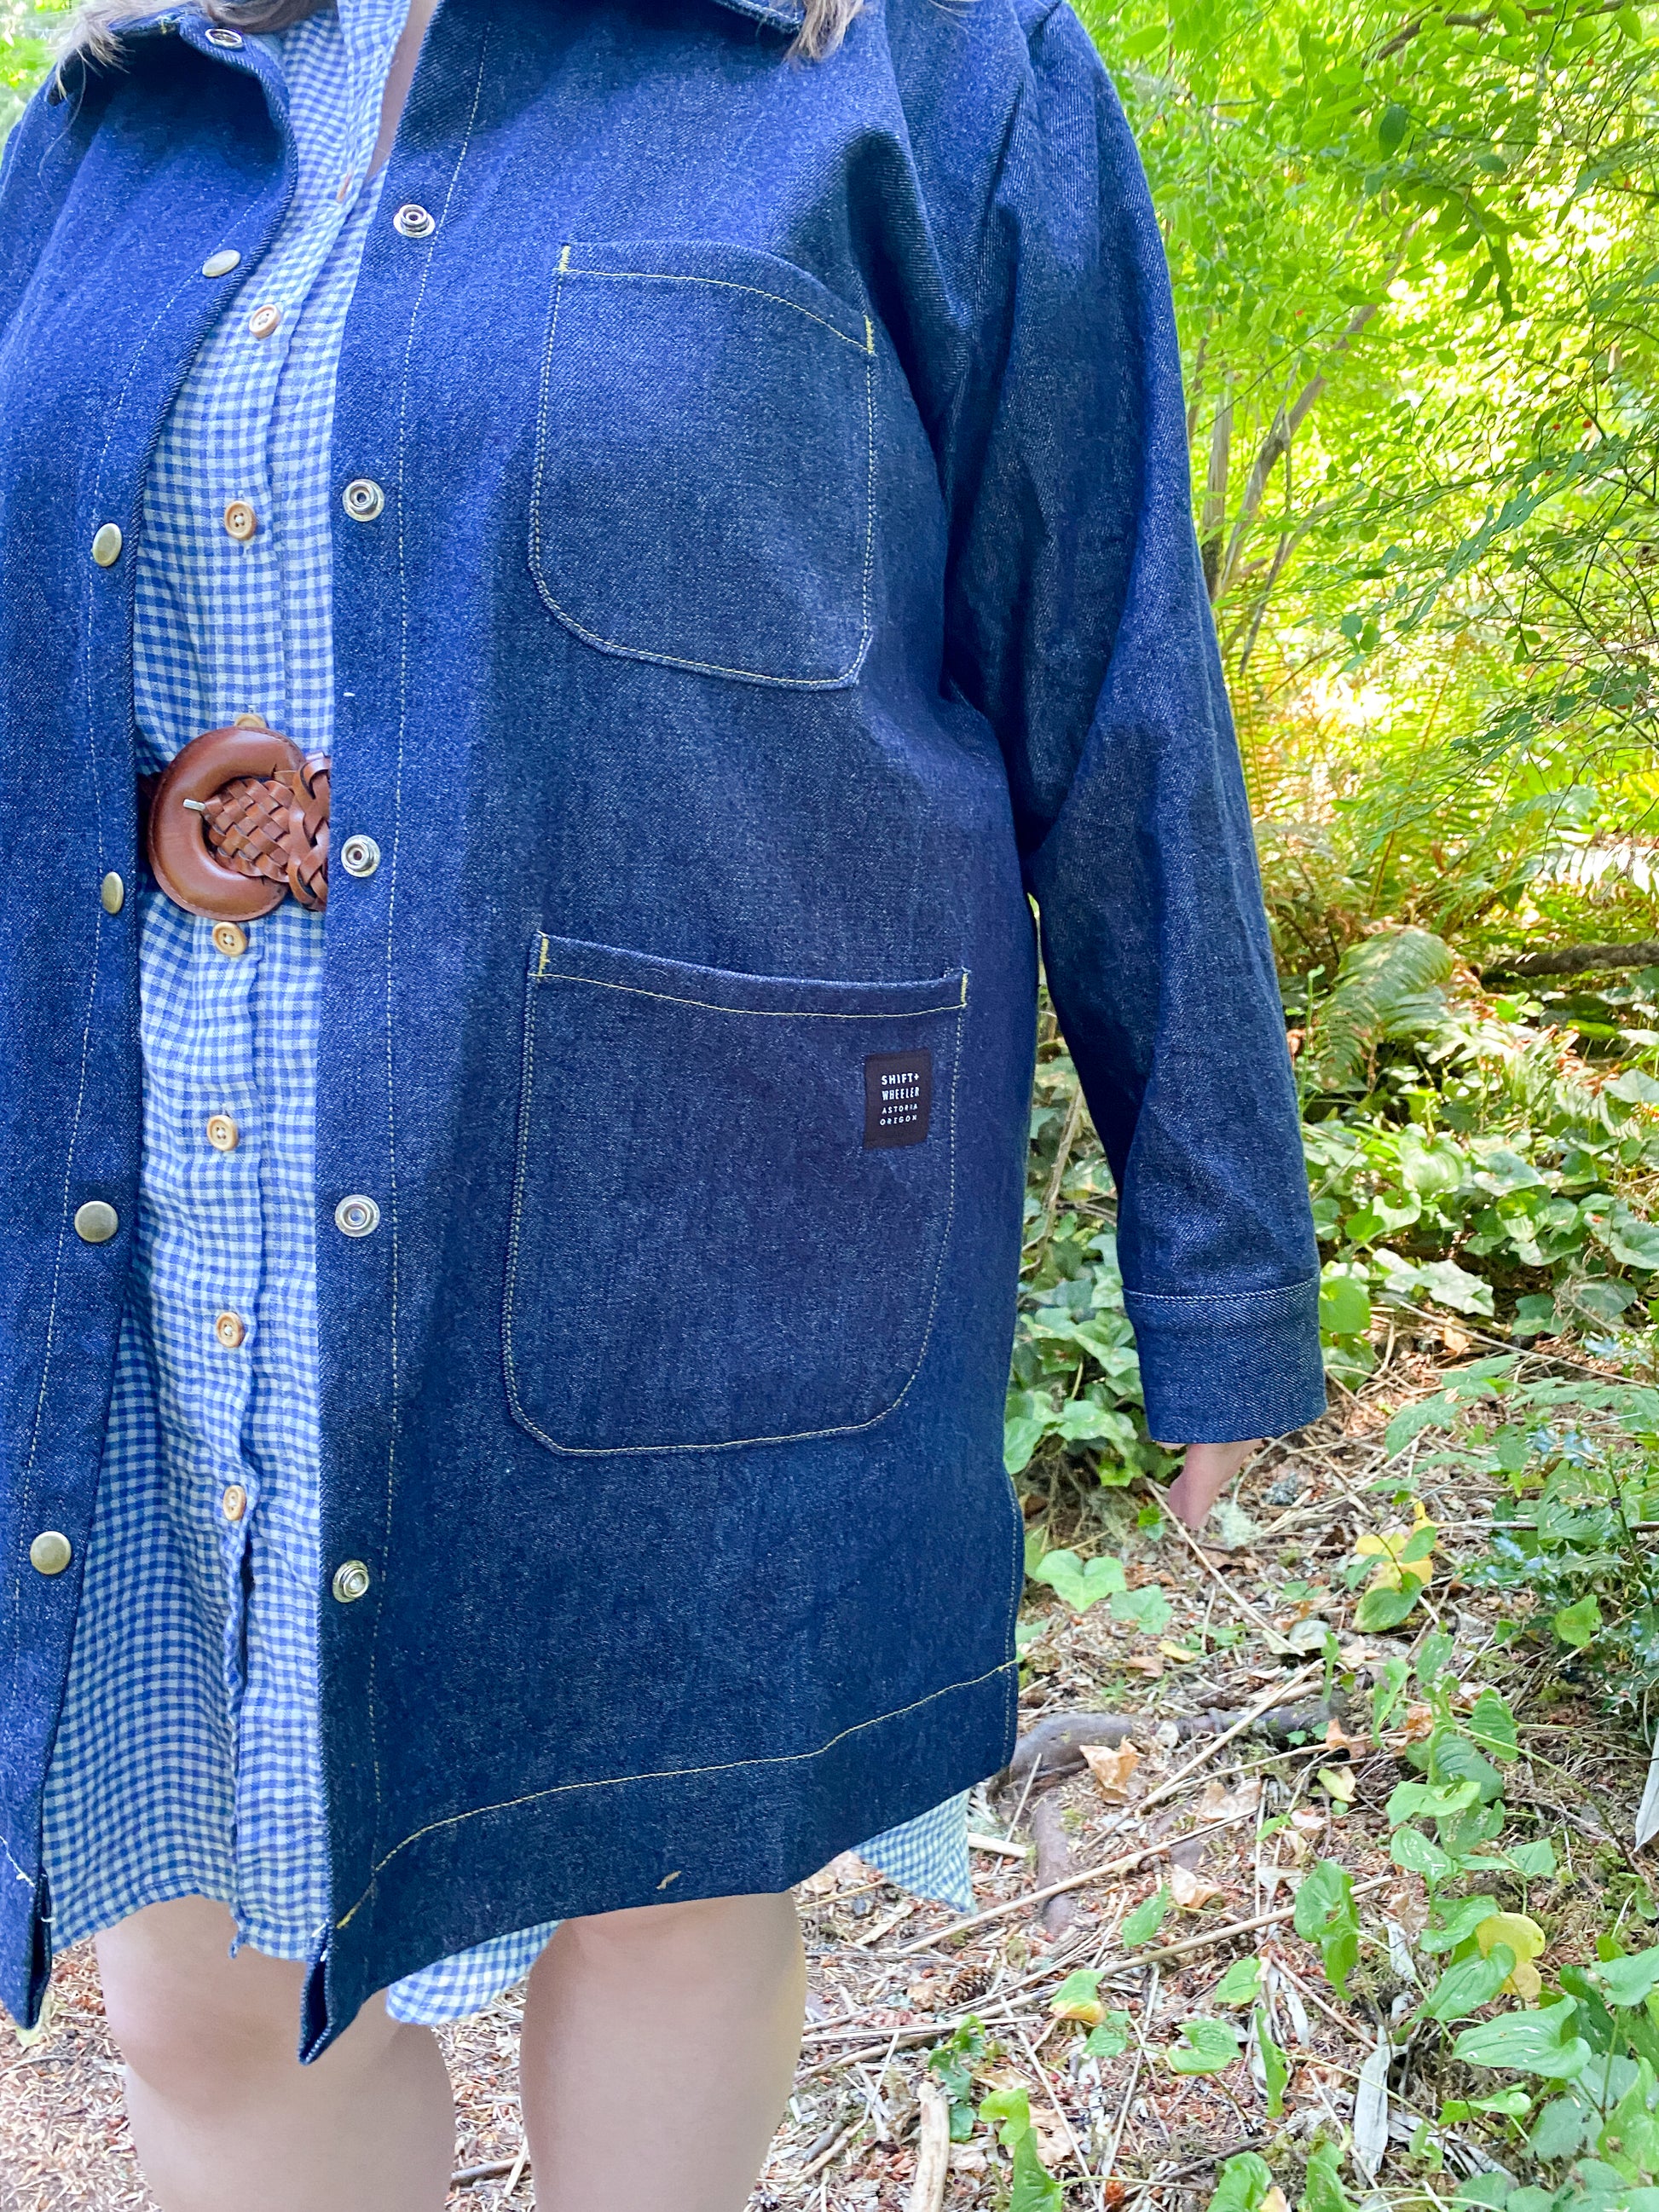 Close up detail of Denim Jacket that shows top stitching, large pockets, and snap buttons. 